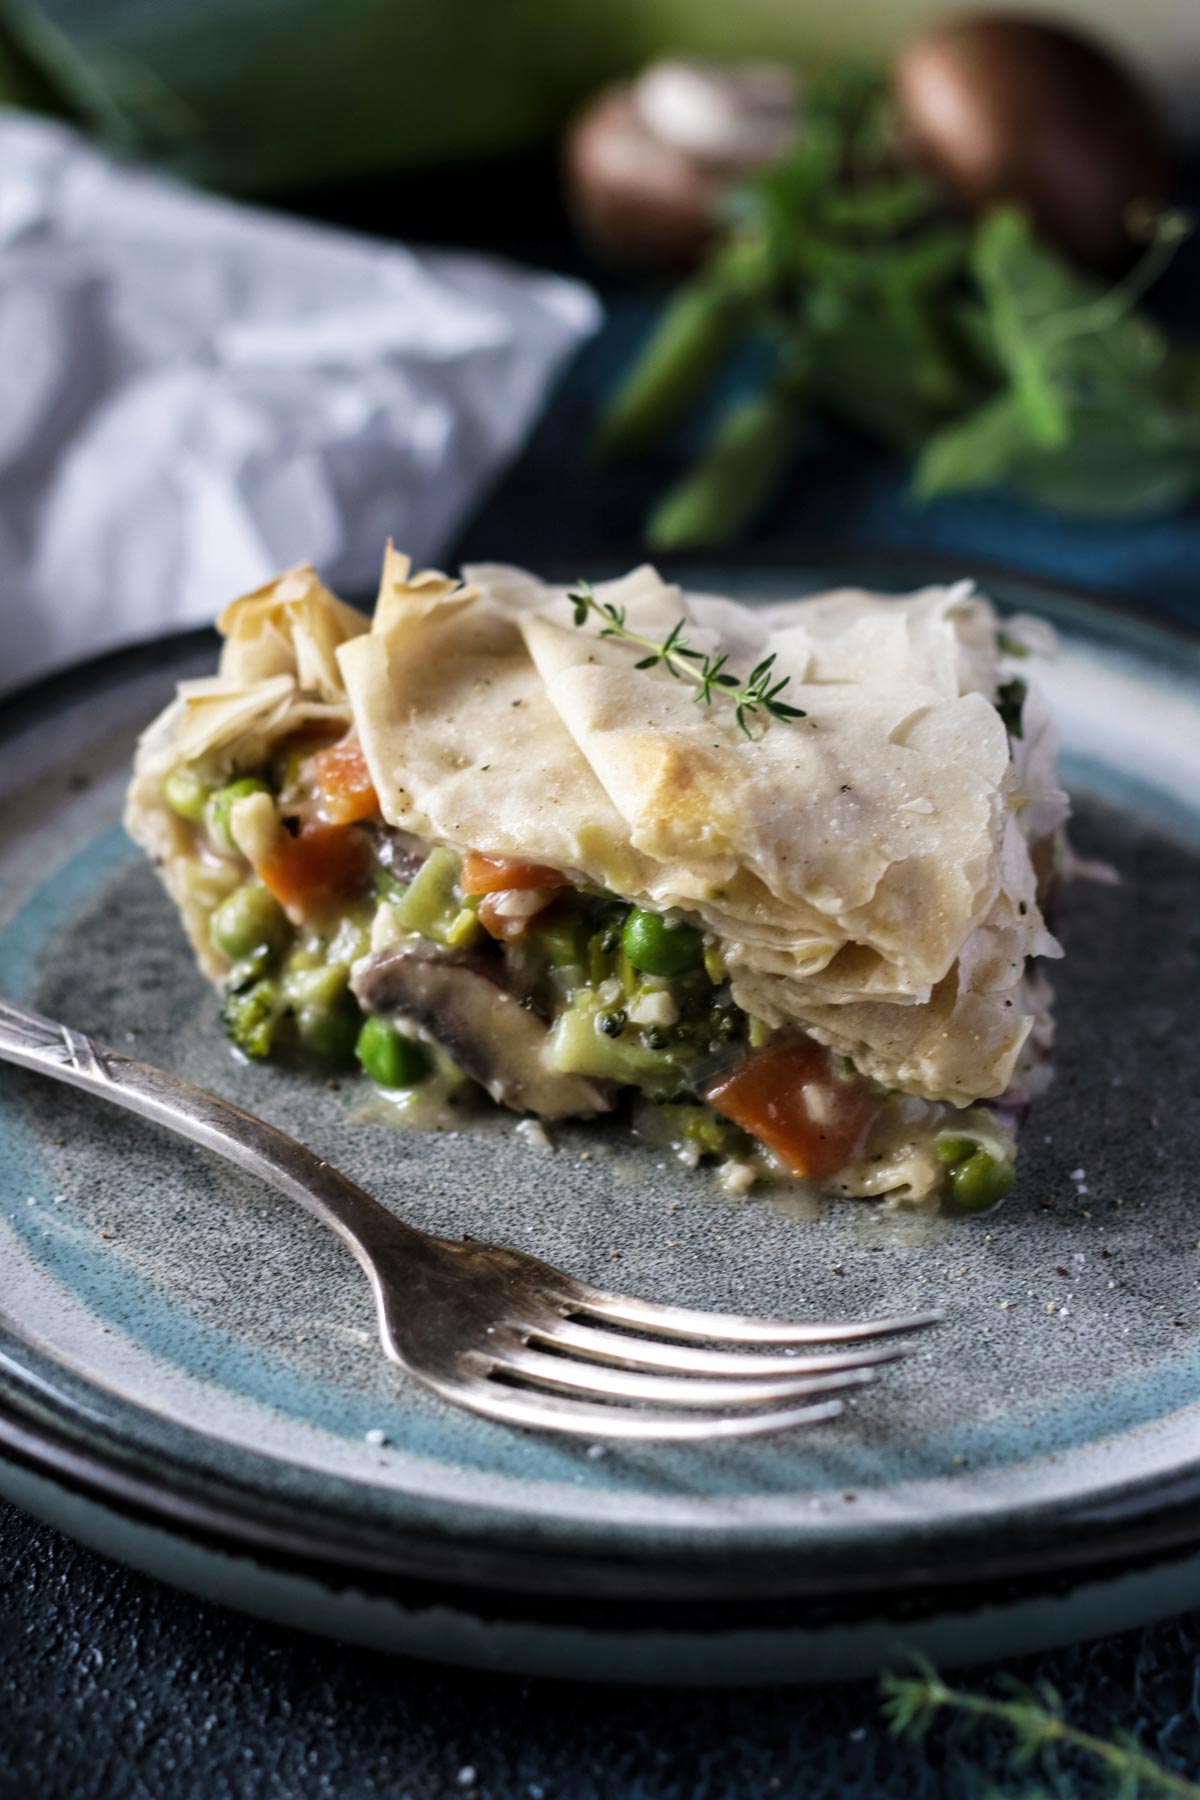 A Slice of Phyllo Pot Pie with Vegetables and Mushrooms on a Grey Plate.